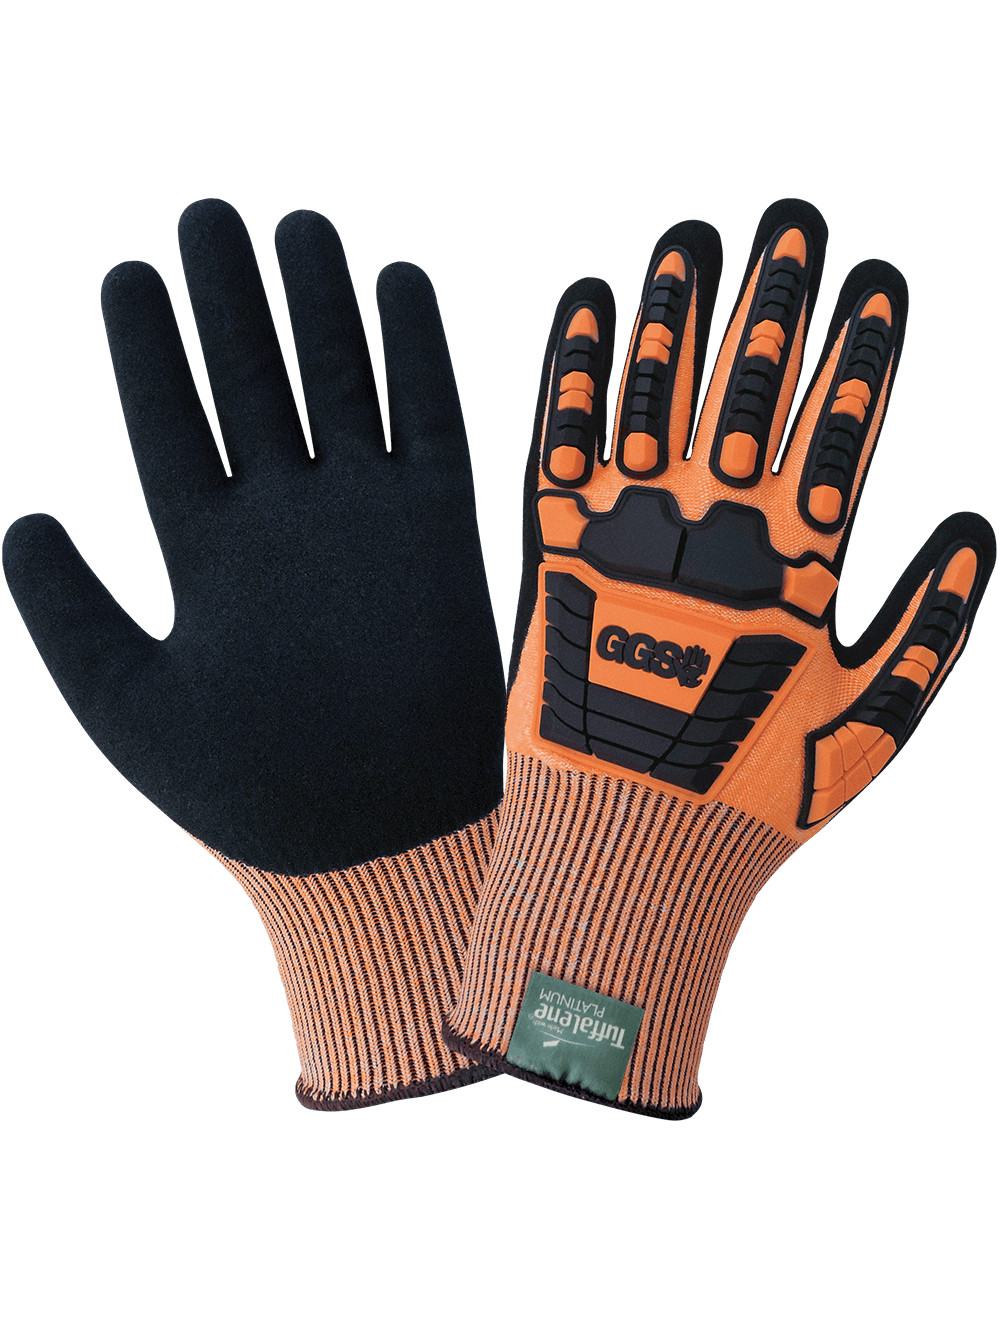 Protection, High-Visibility Cut Eye Protection, Heat Protection Stress, with Cut CIA388XFT Tuffalene® Global and Impact Safety Platinum Gripster® and Resistant Glove Protection, - Hand C.I.A. Vise Cooling Gloves Resistant Made